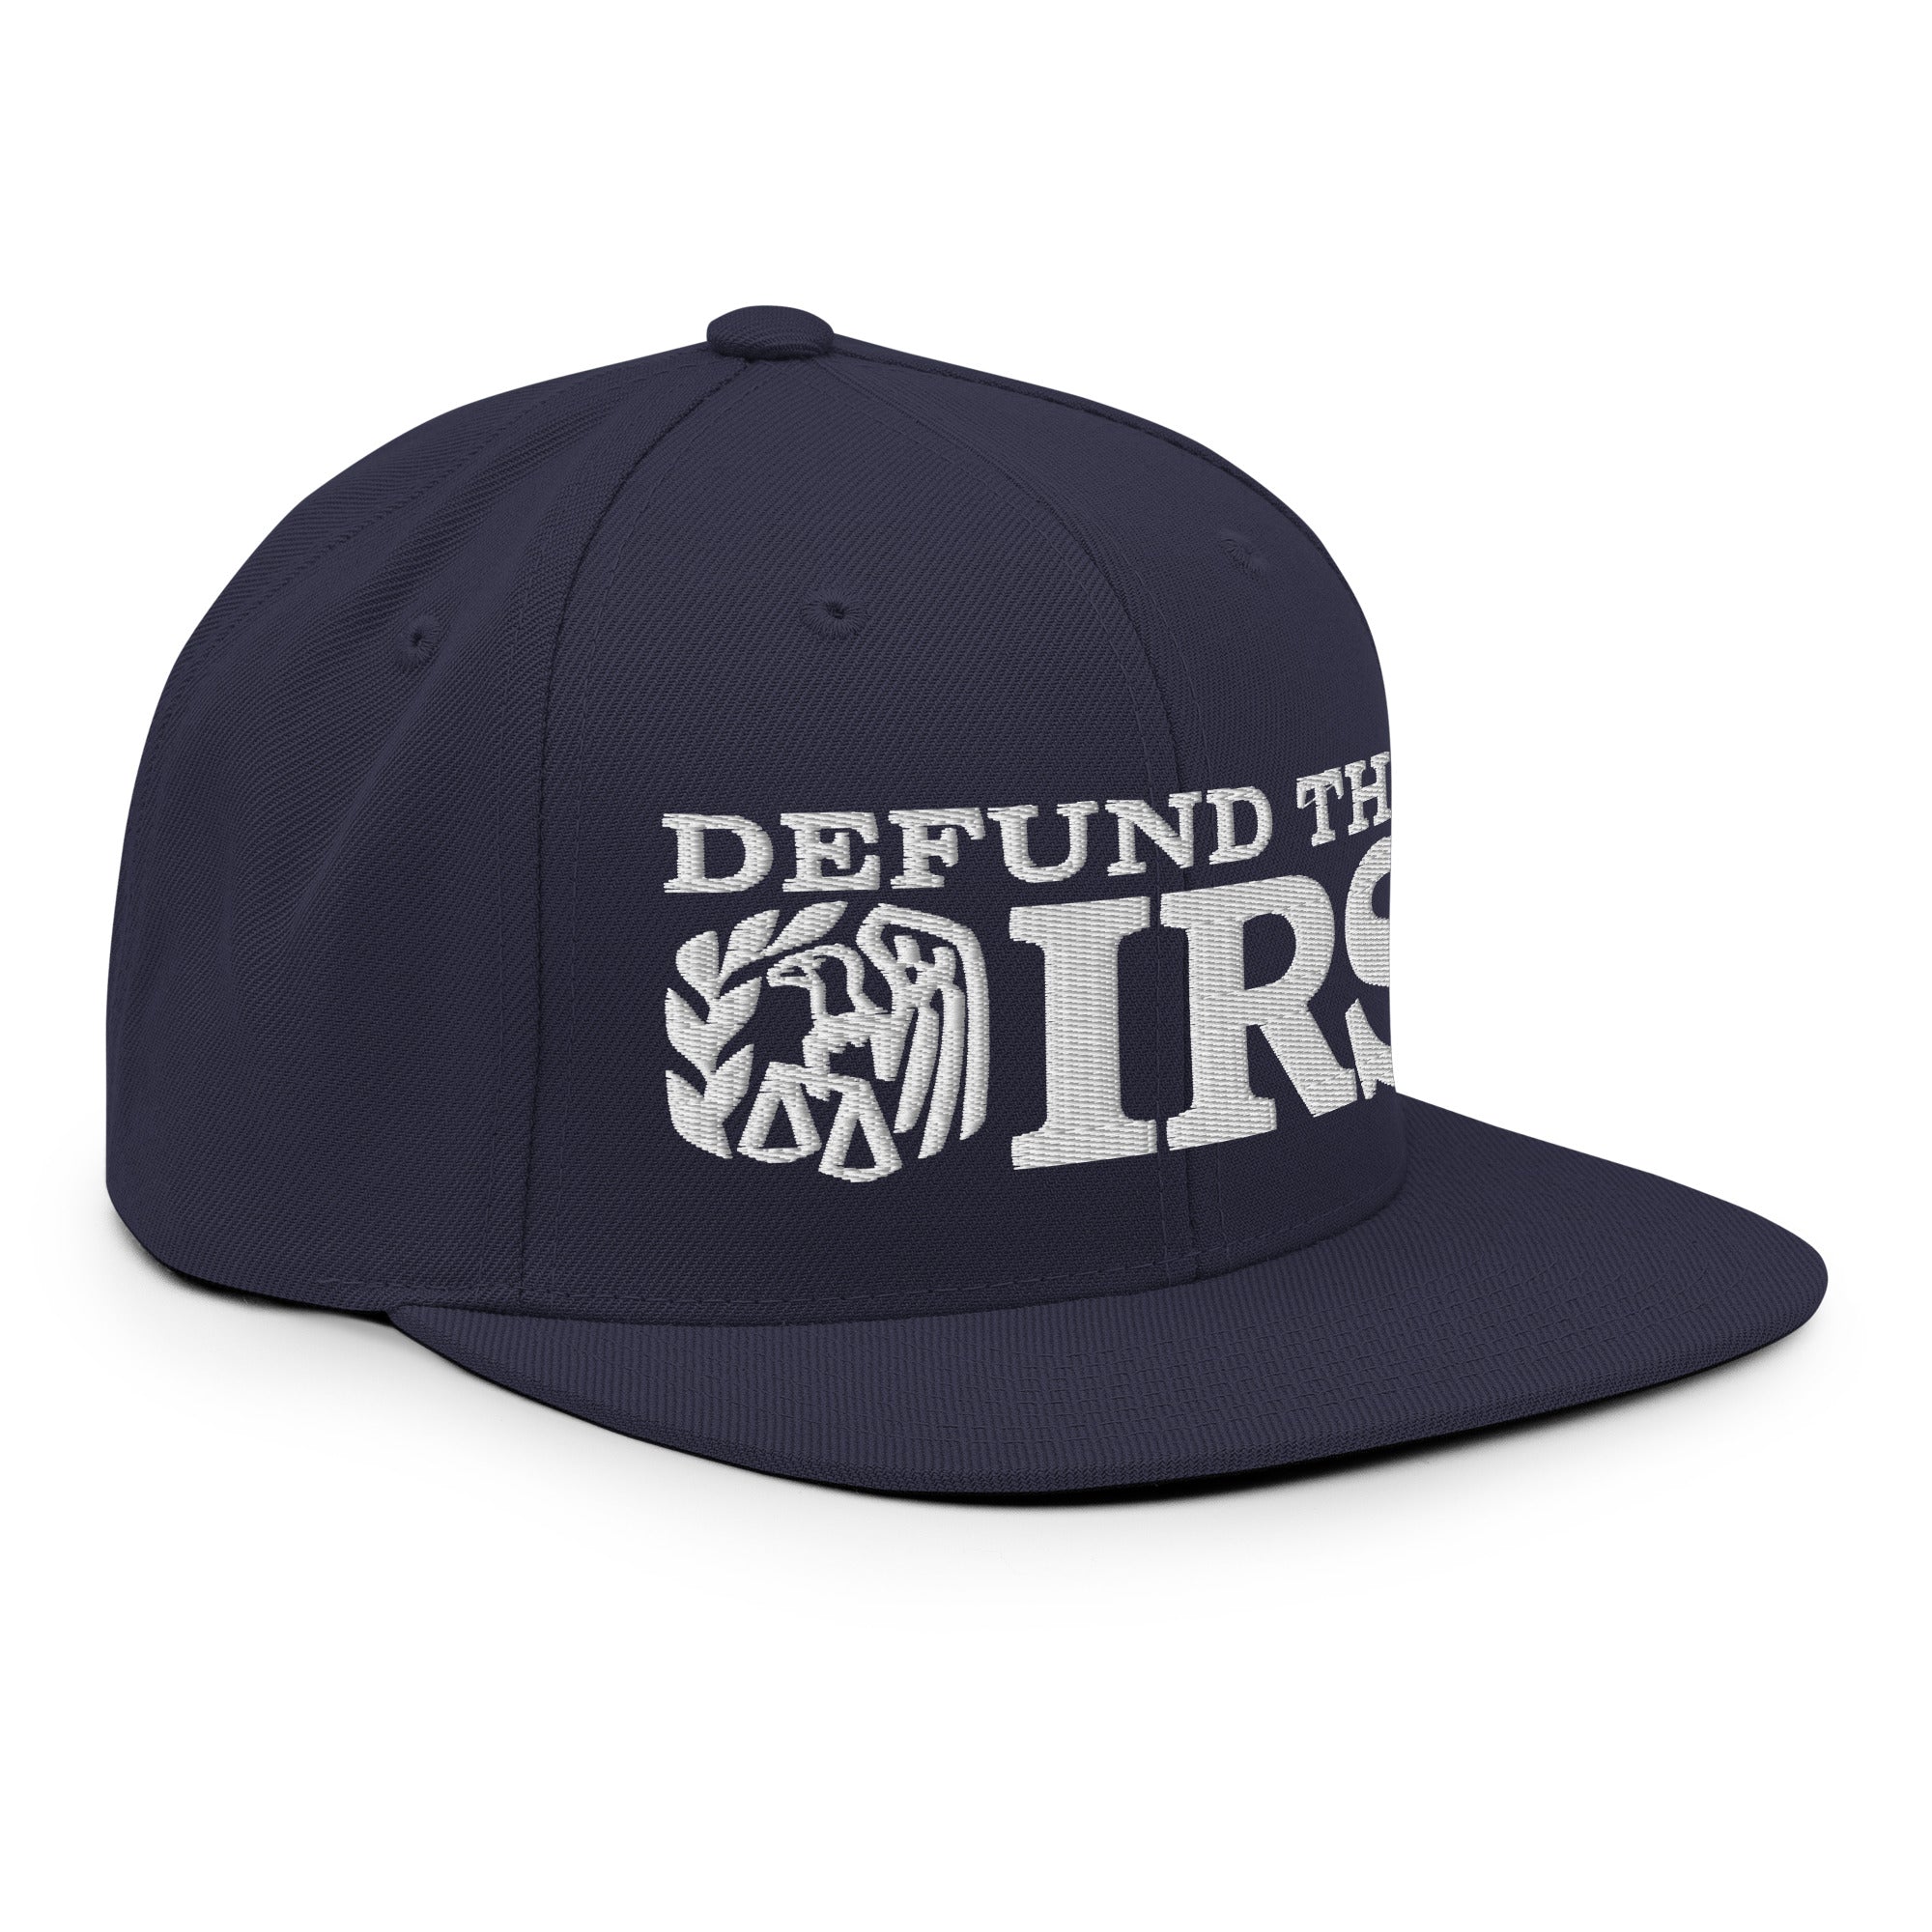 Defund the IRS Snapback Hat